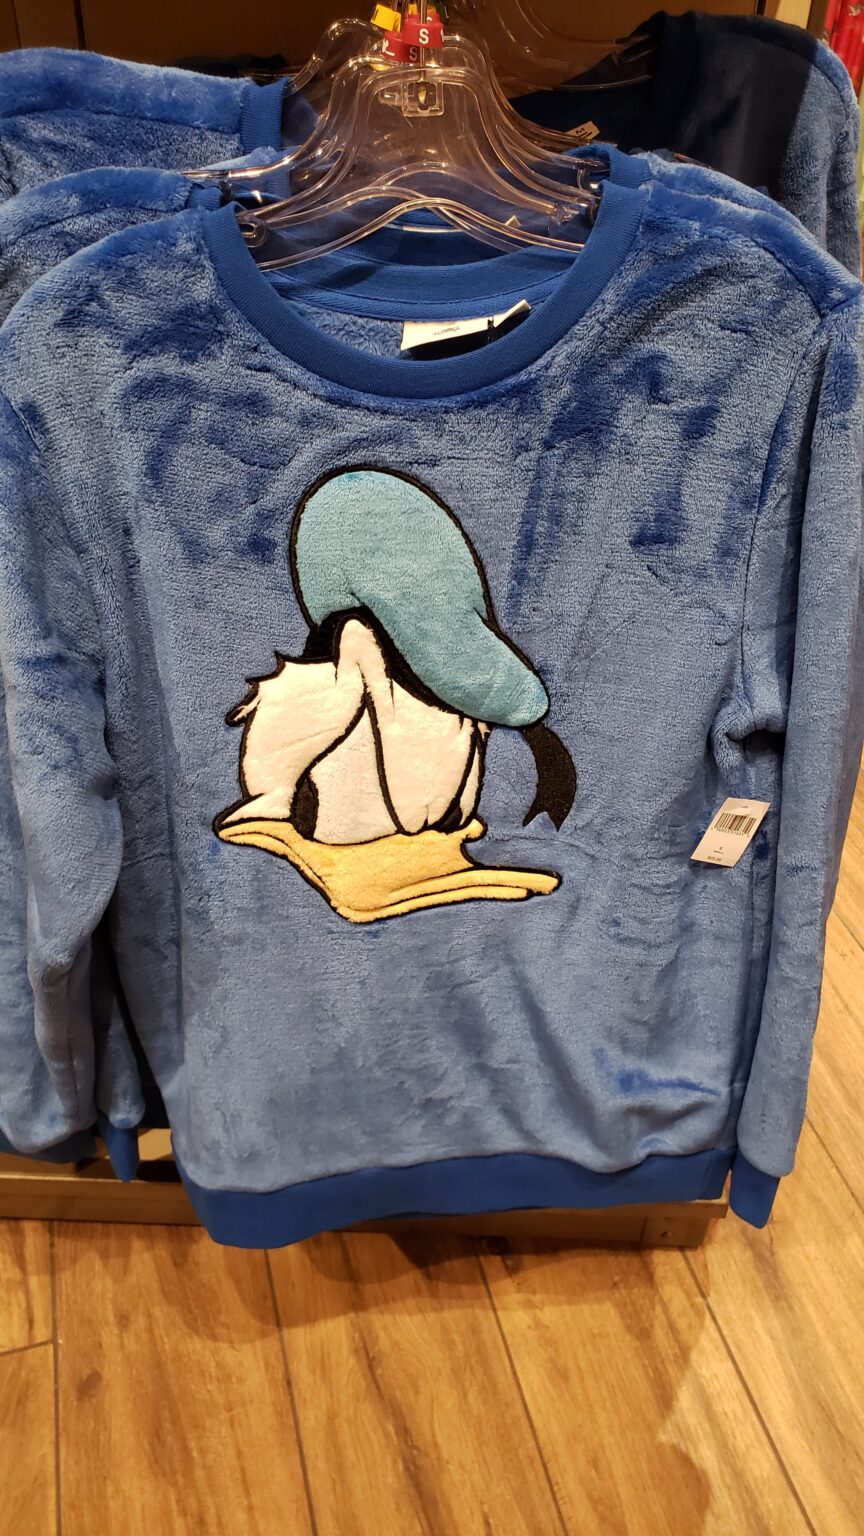 Snuggle Up with Mickey and his Pals in these Adorable Fuzzy Sweaters